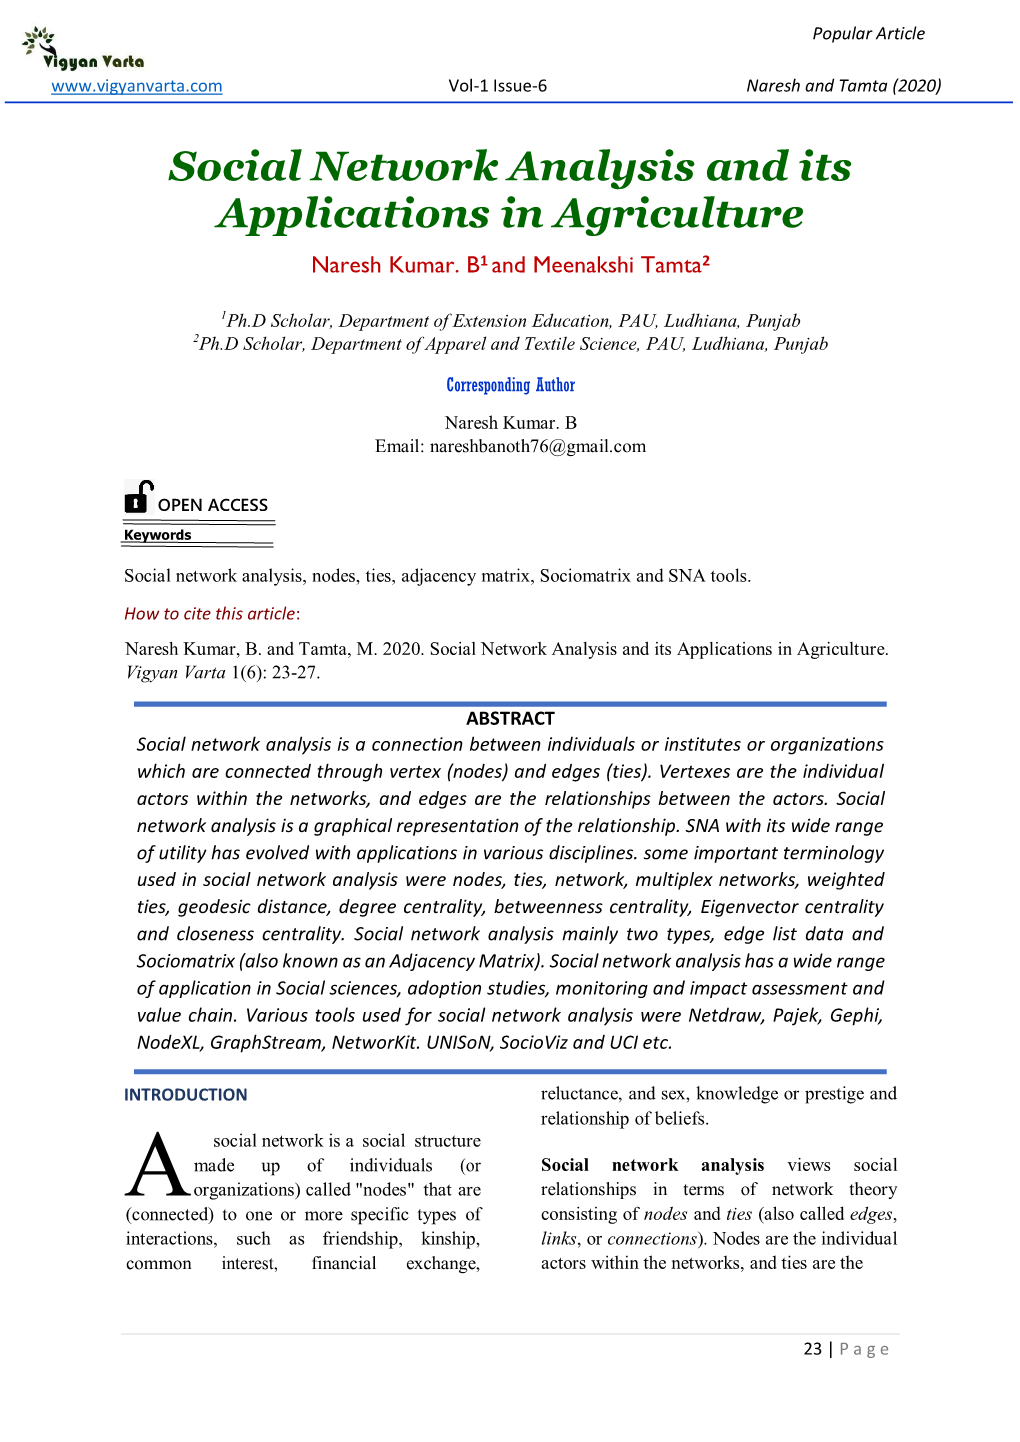 Social Network Analysis and Its Applications in Agriculture